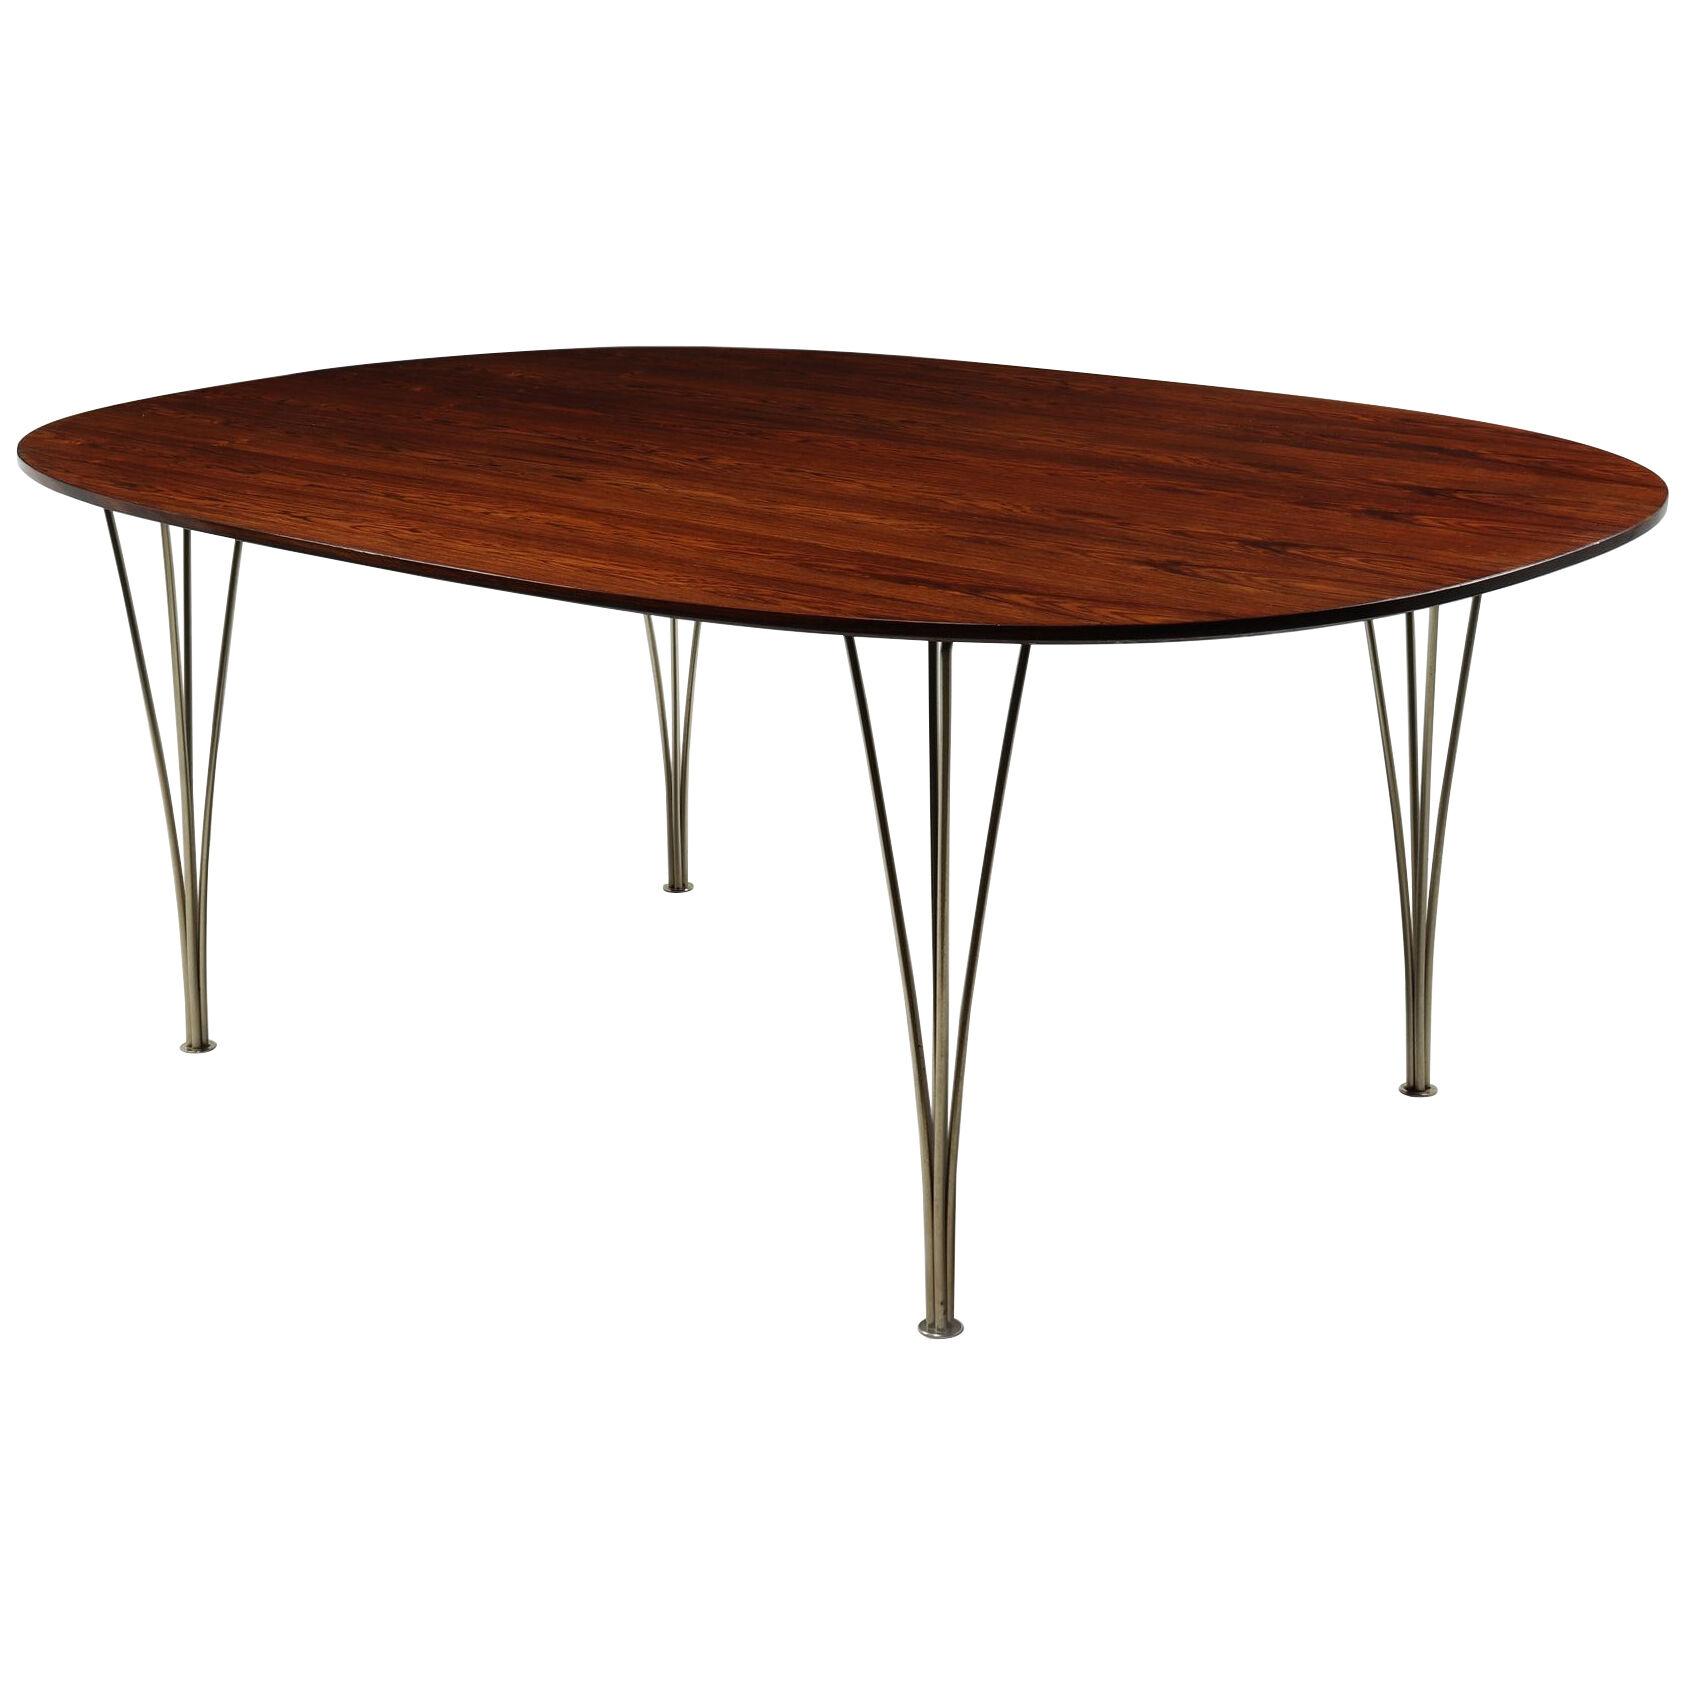 Super Elliptical Dining Table by Piet Hein and Bruno Matheson c1960